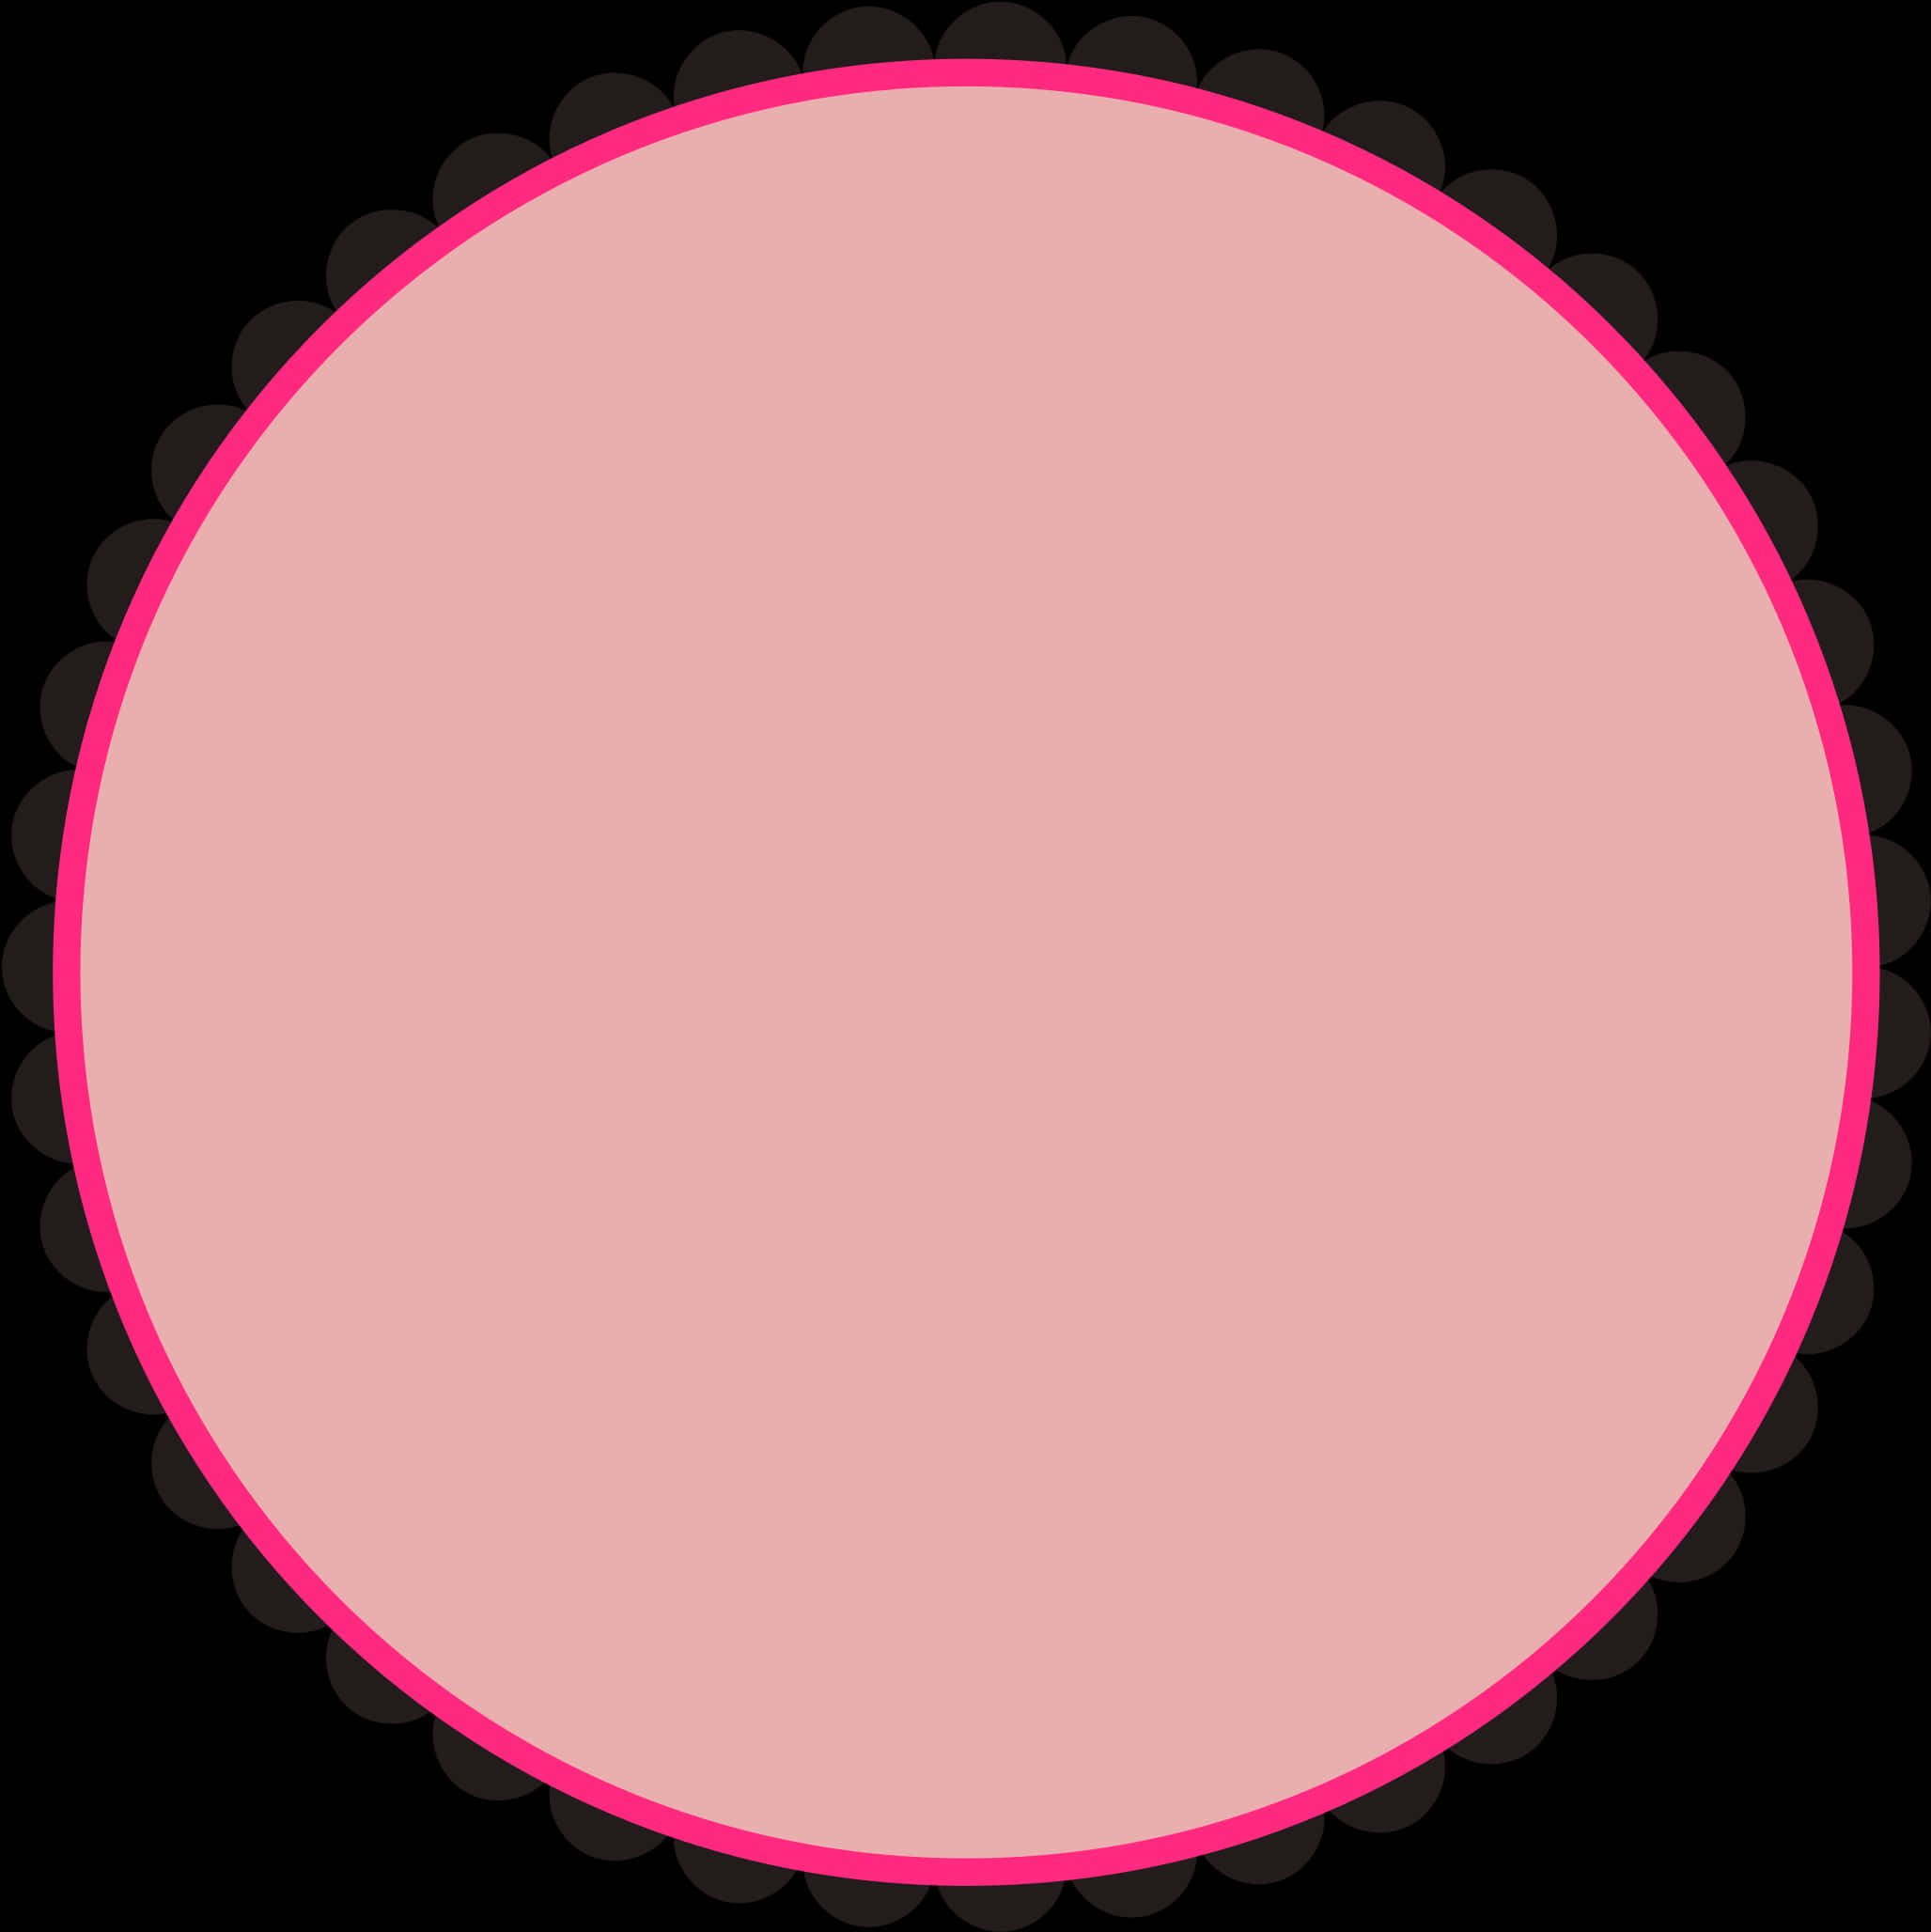 Round Pink Framewith Scalloped Edge